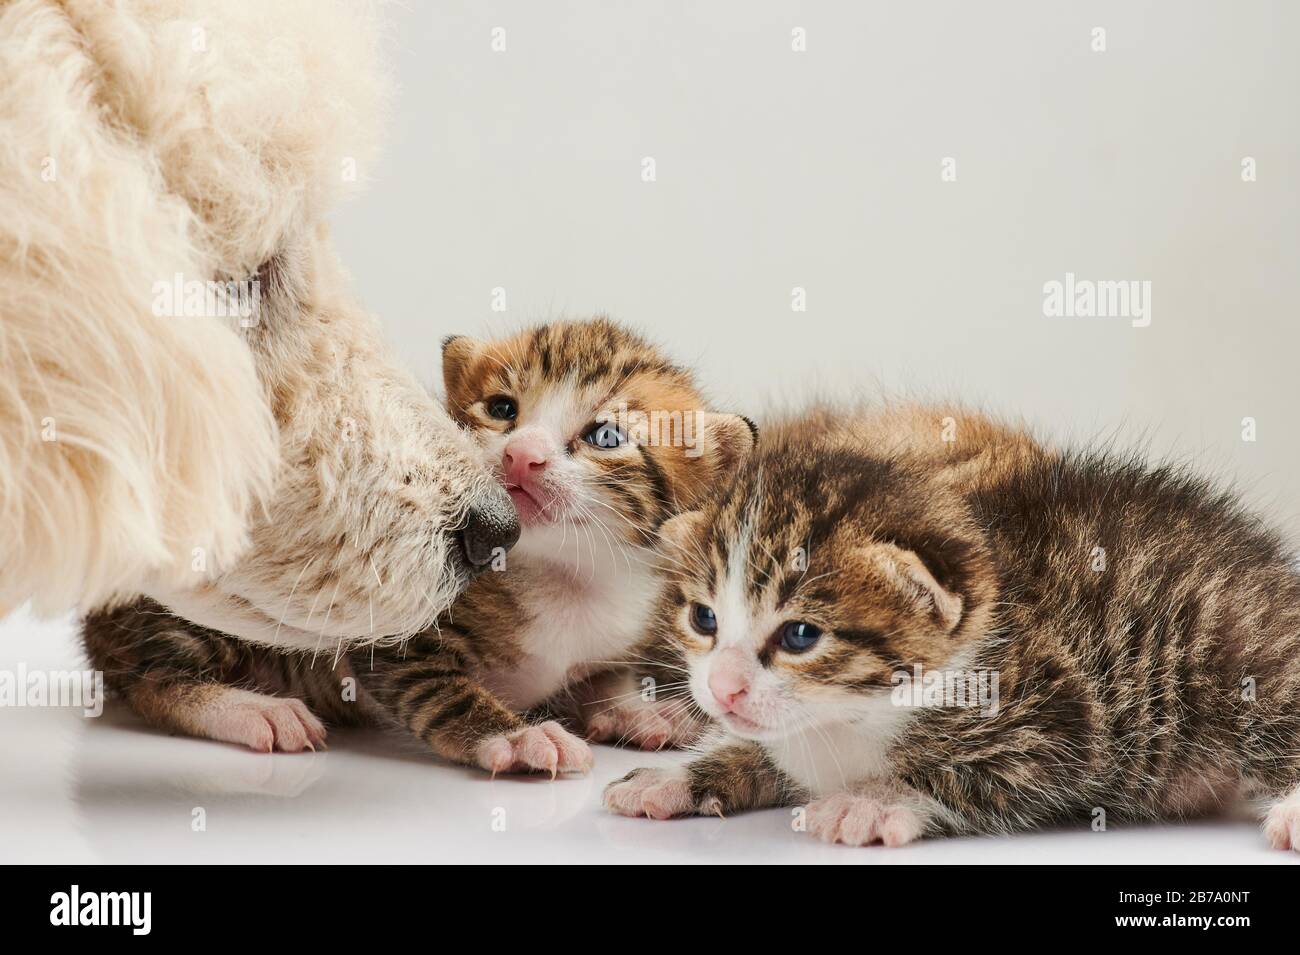 Poodle dog taking care of cats close up view Stock Photo